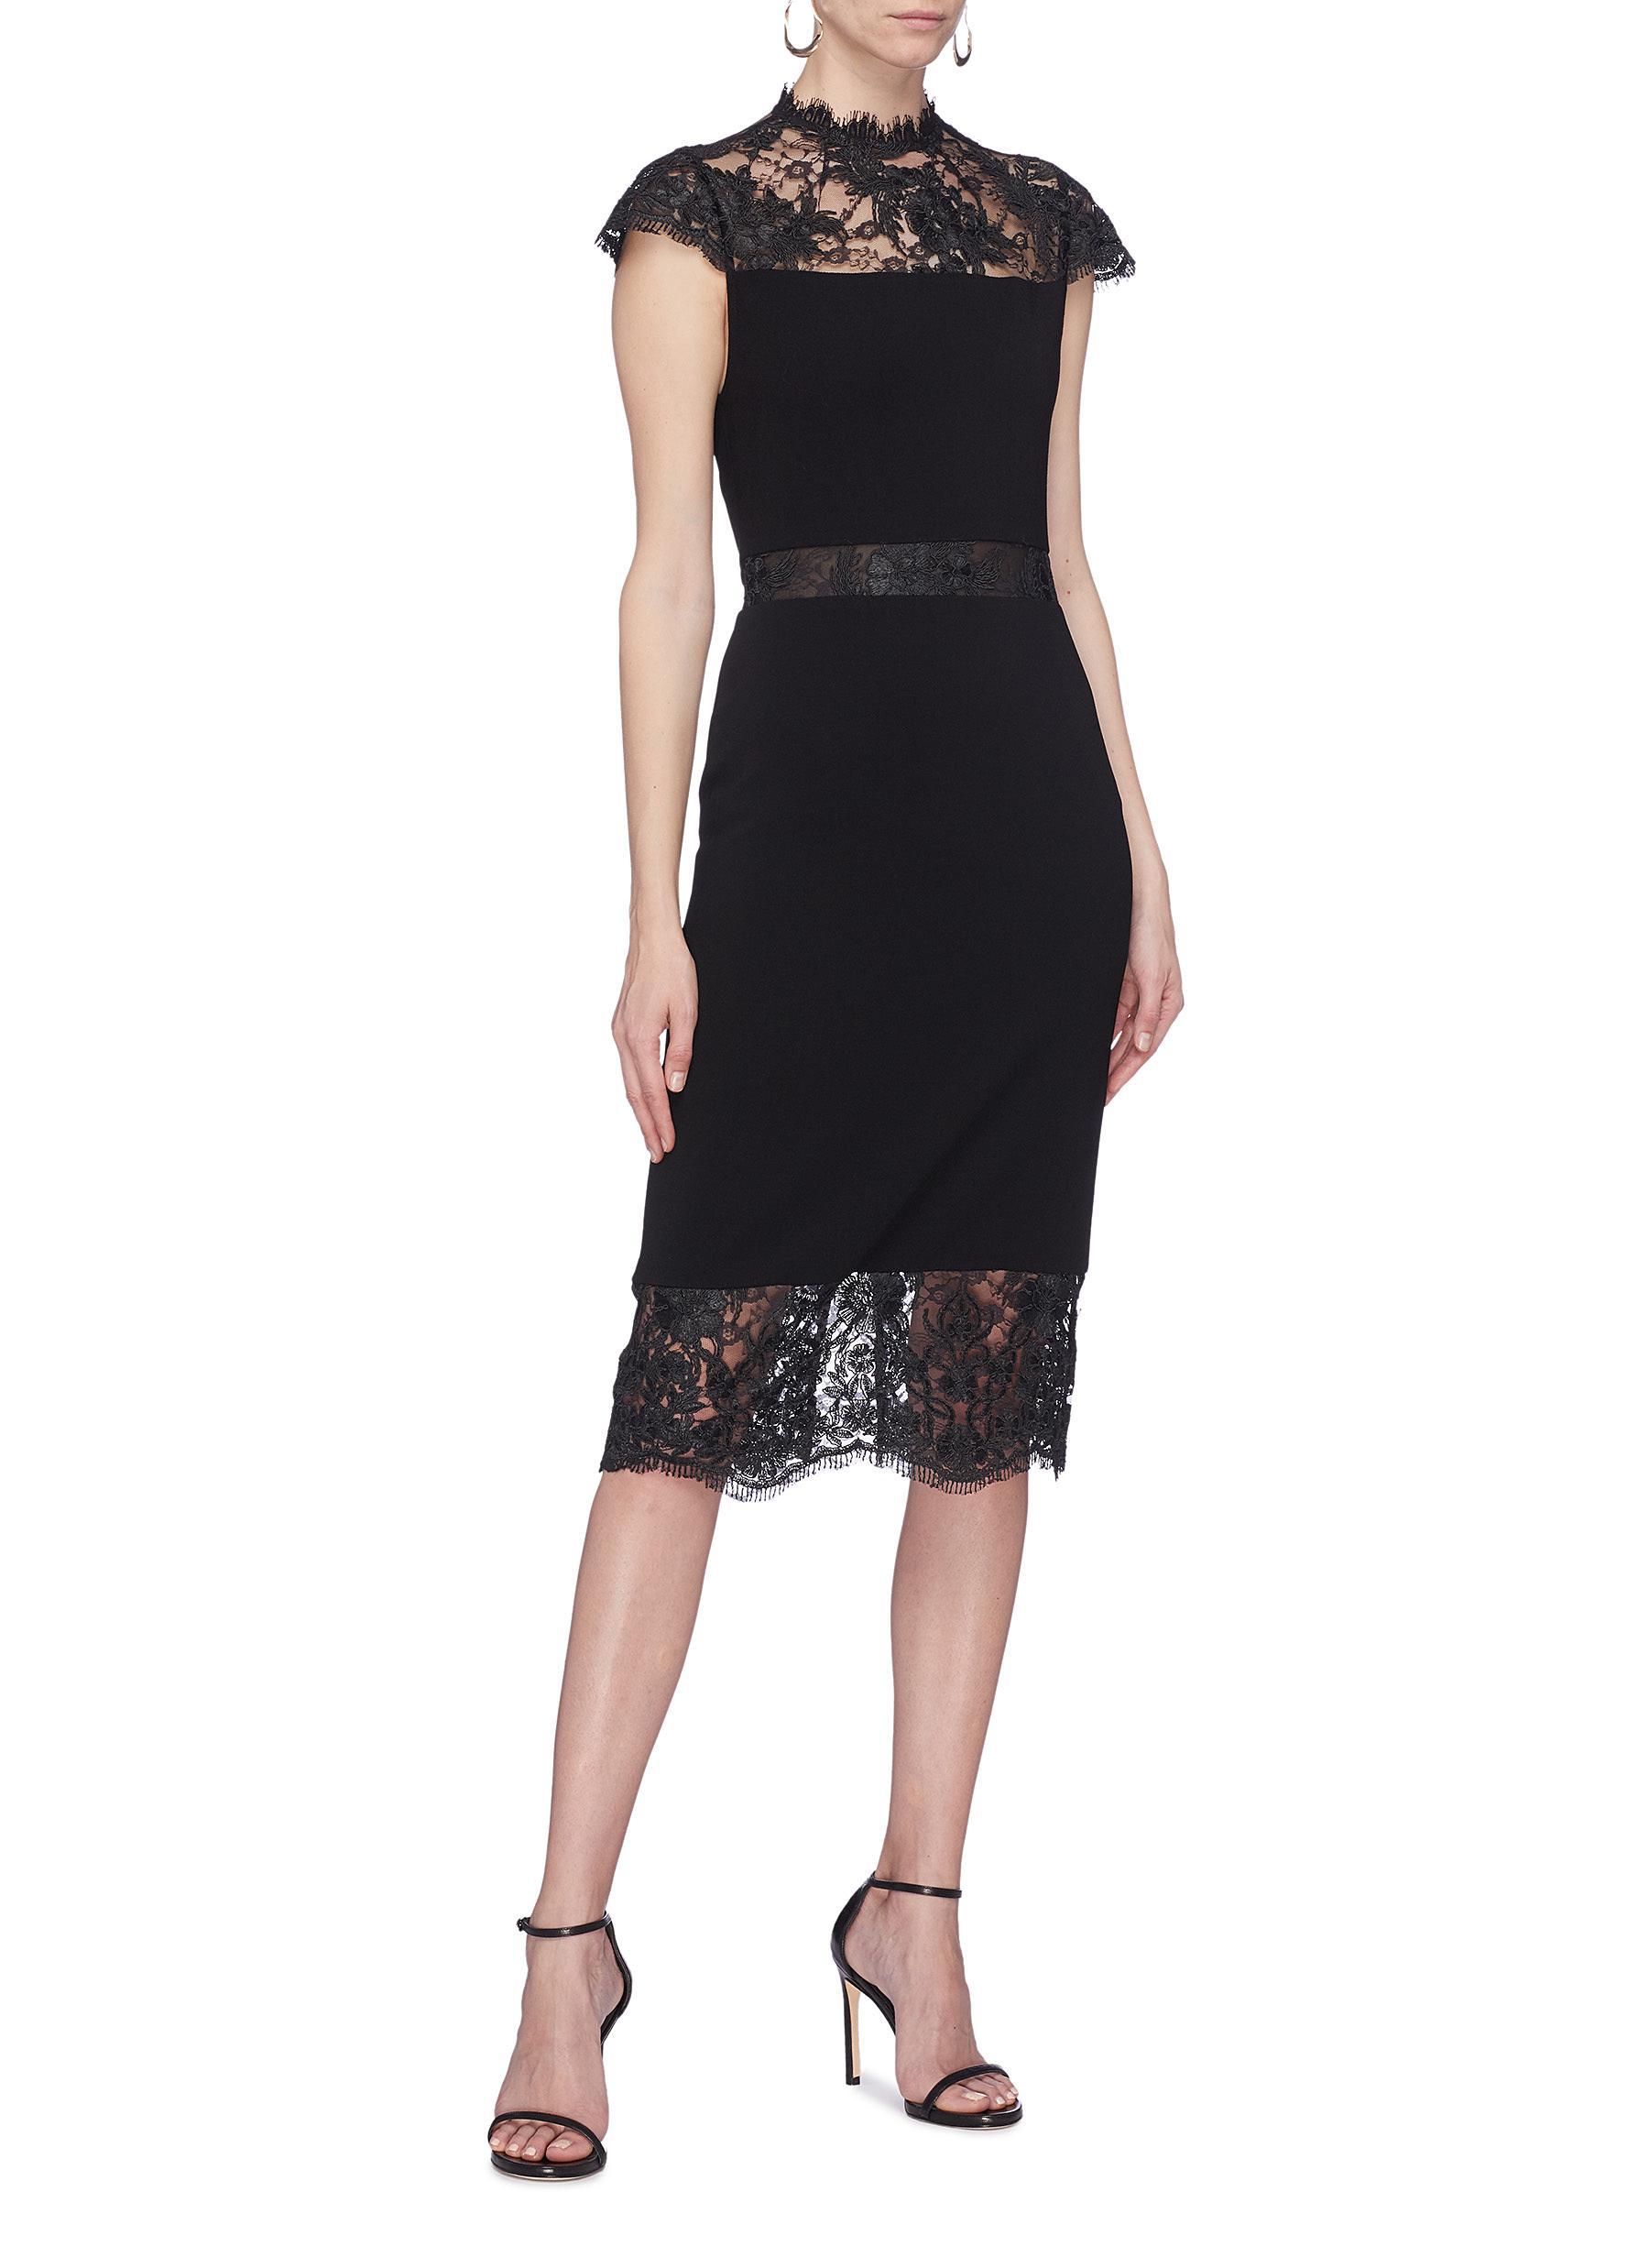 Alice + Olivia 'kim' Chantilly Lace Panel Dress in Black - Lyst